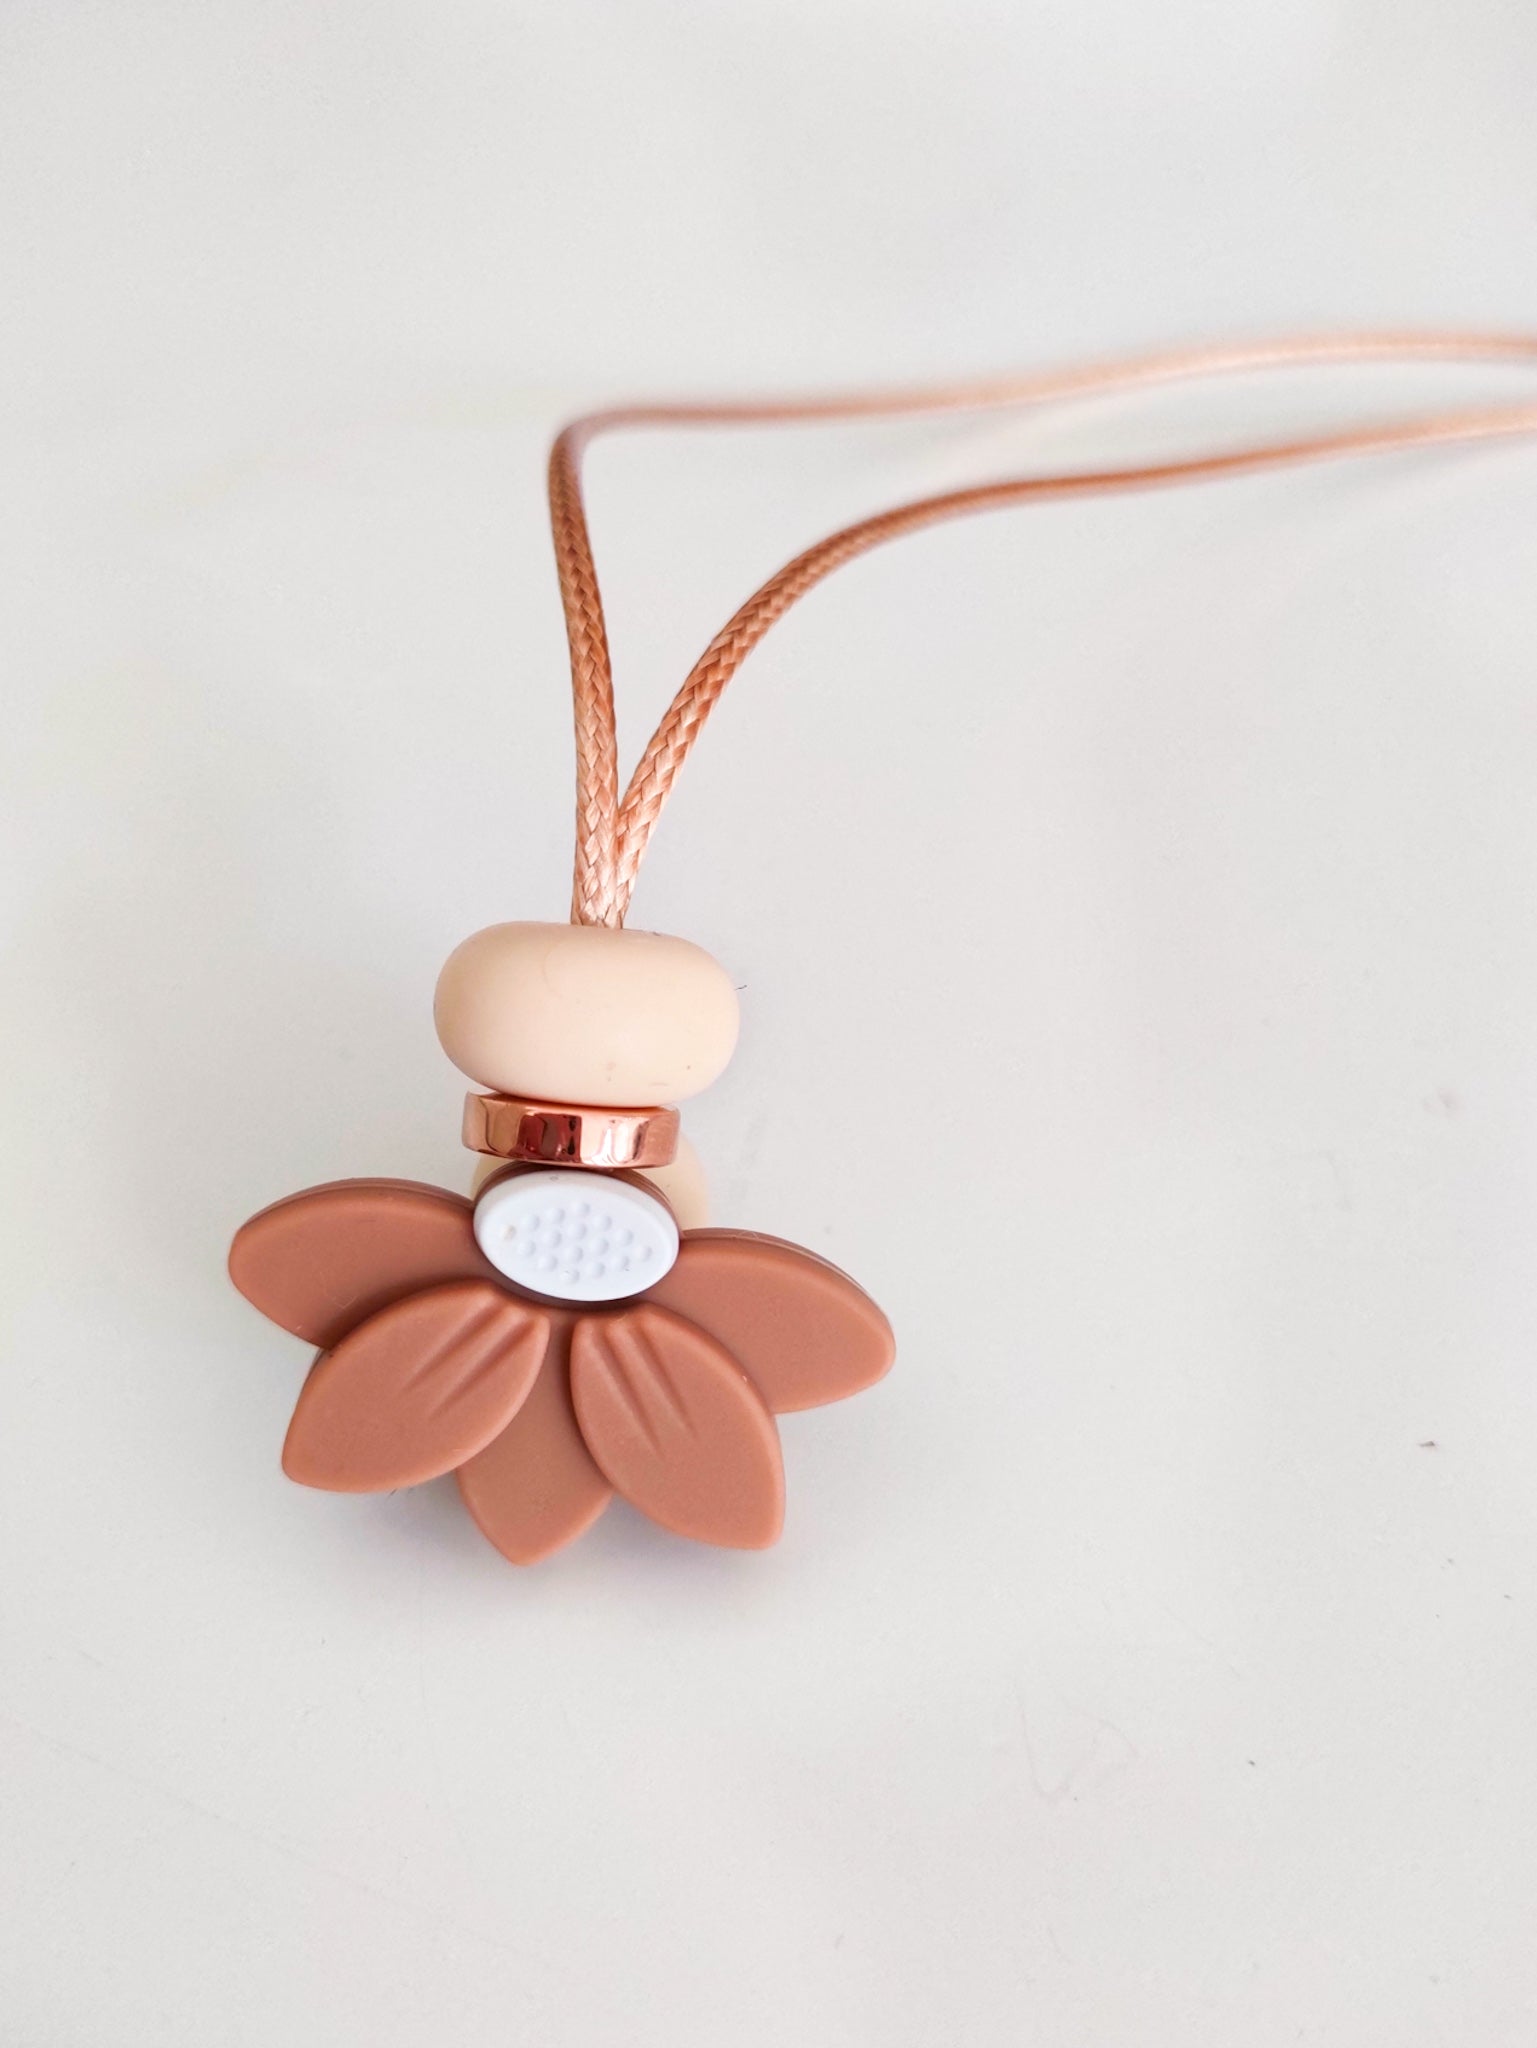 Dainty Half Lily Pendant - Bennie Blooms Breastfeeding, Teething and Fiddle Jewellery at its finest.